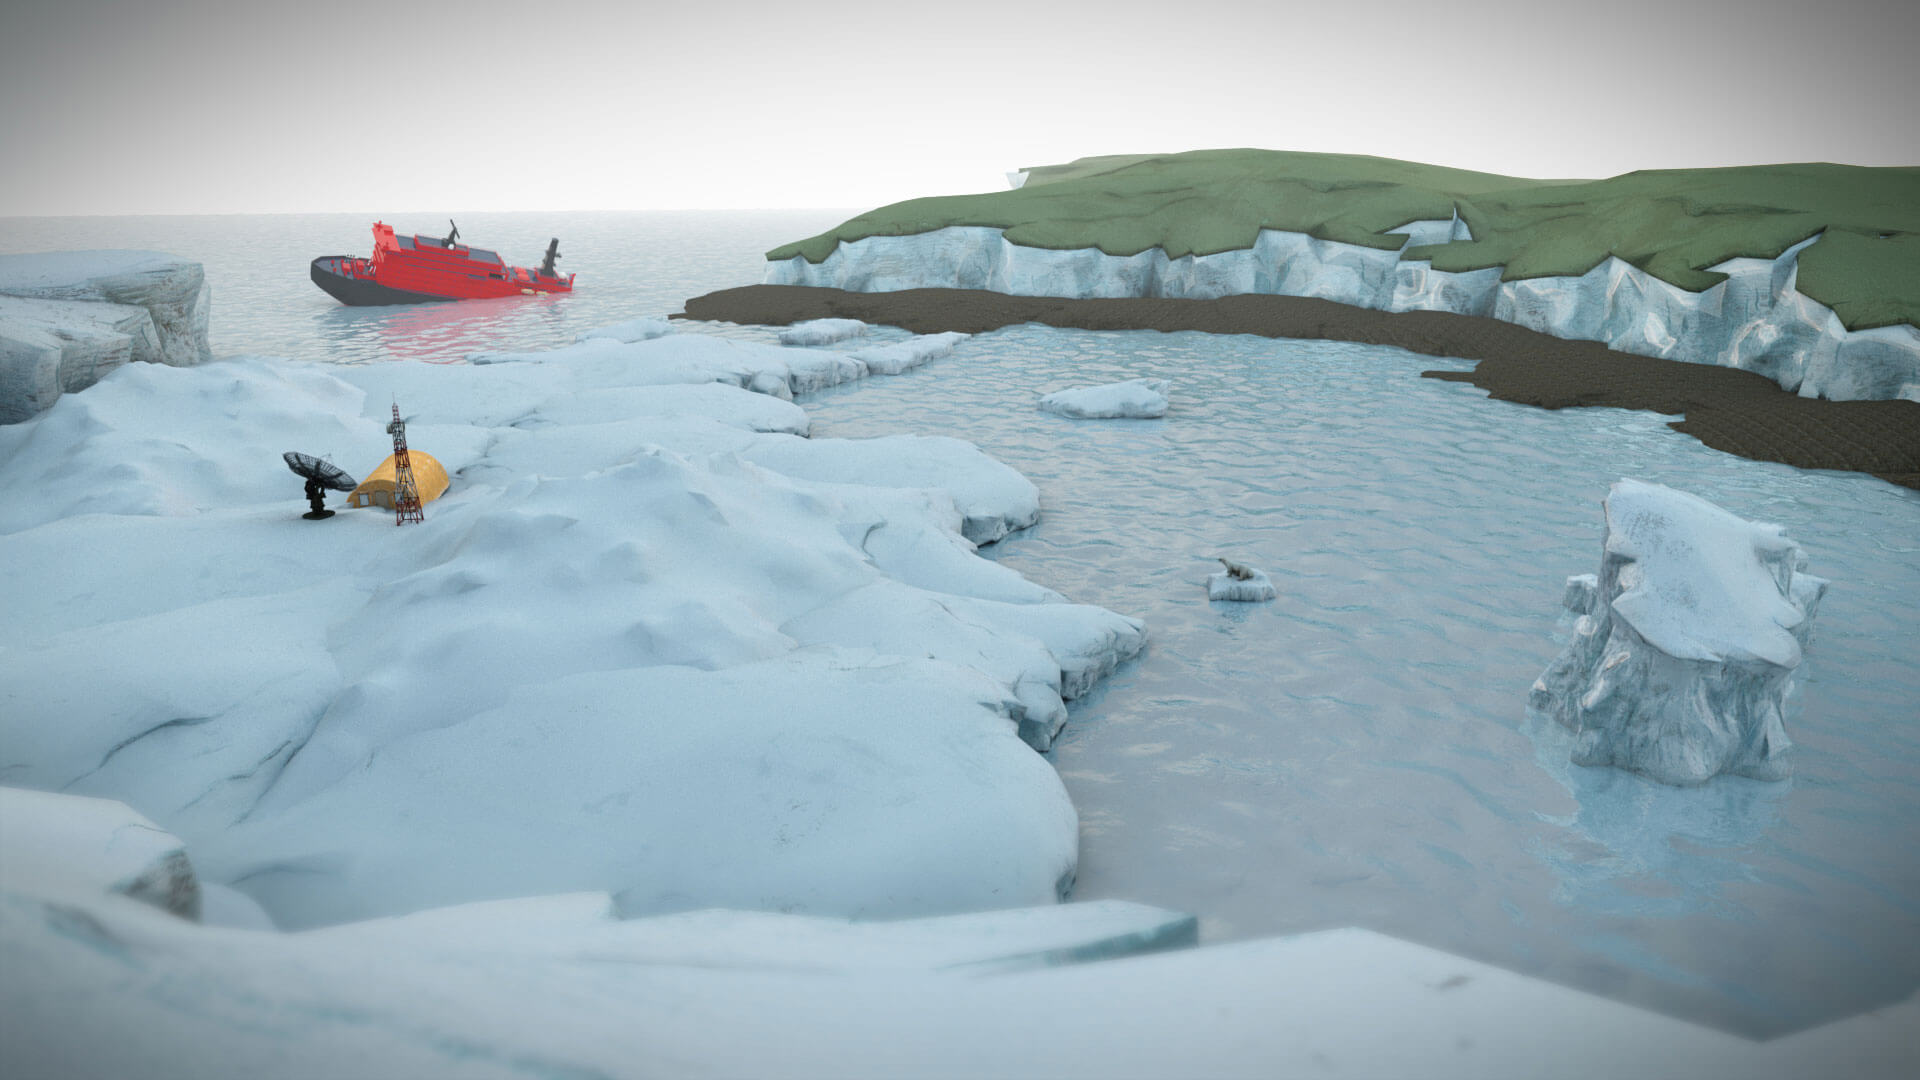 Animated polar scene with ice melting for Siemens game environment